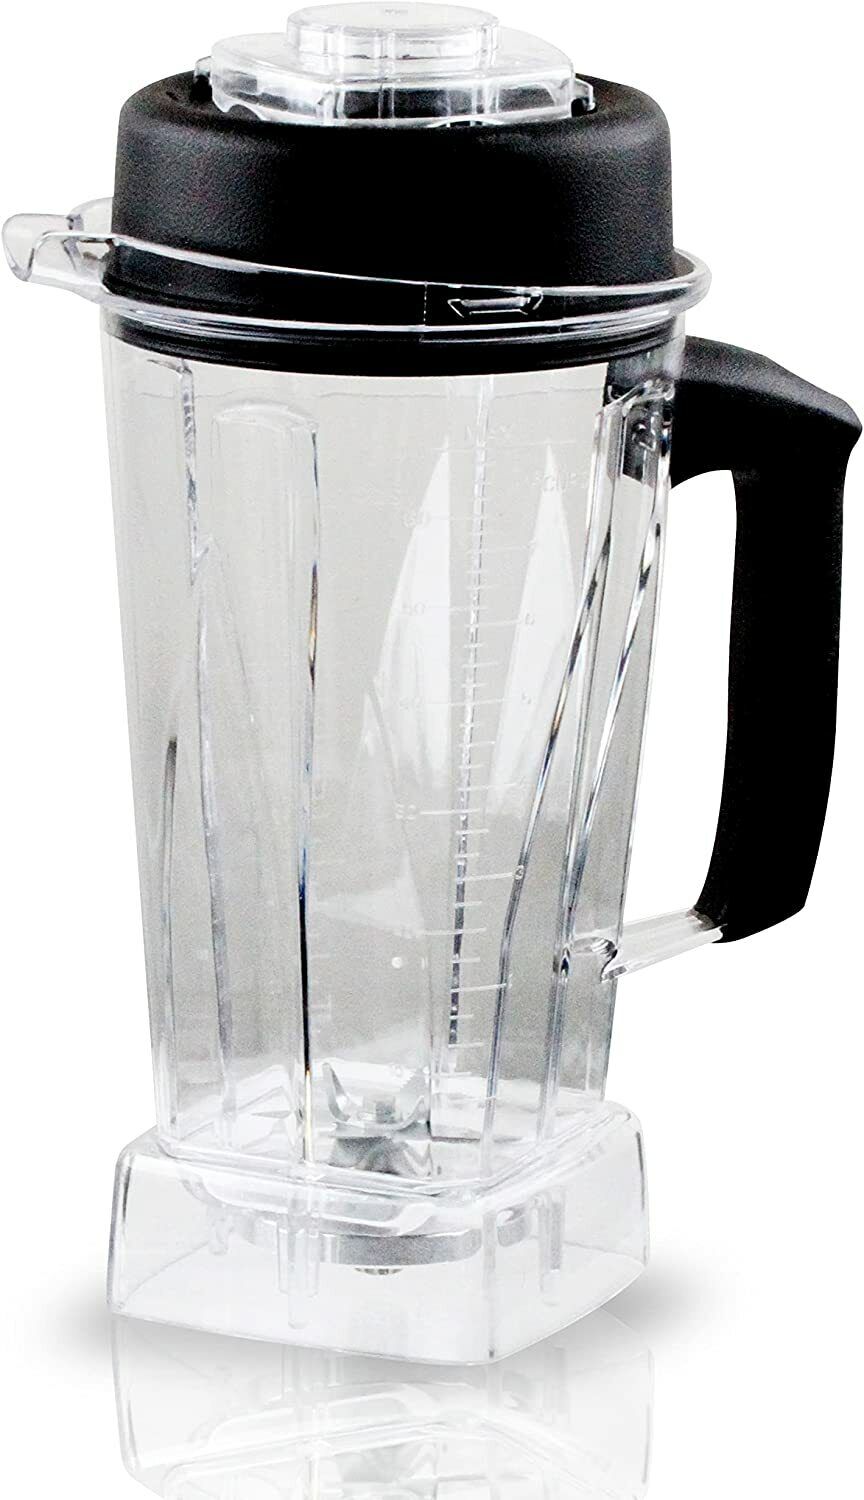 64 oz Container Pitcher Jar for Vitamix 5000 Blender Classic